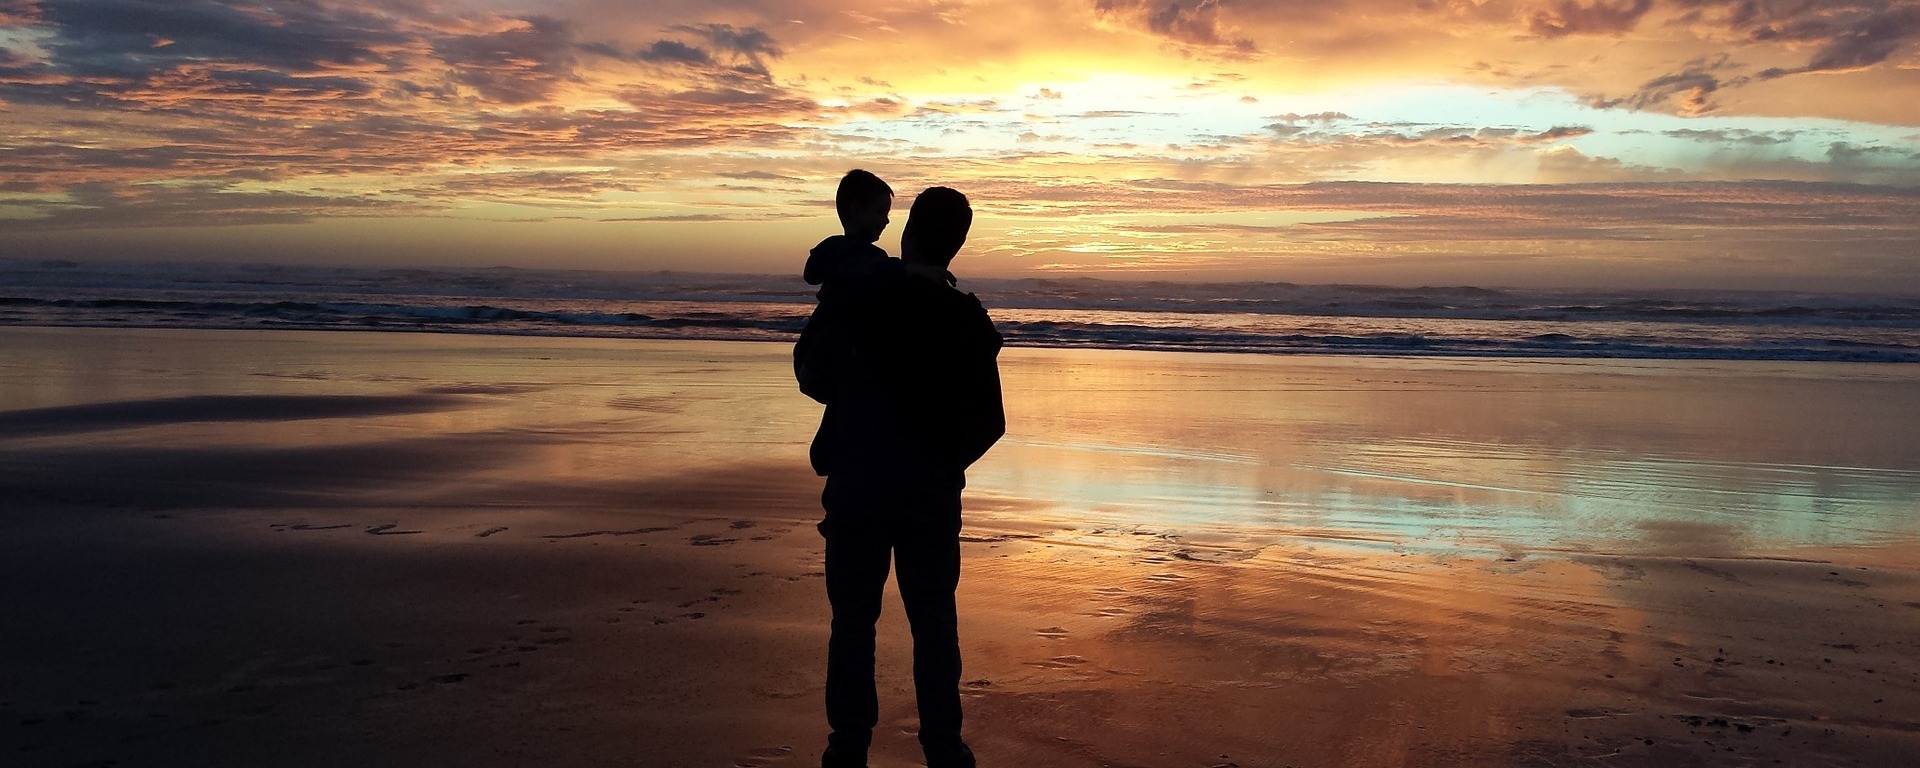 father,son,grandson,man,child,sunset,beach,water,beach sunset,ocean,sea,vacation,sky,summer,sun,nature,travel,horizon,sand,tropical,landscape,coast,evening,shore,wave,orange,blue,silhouette,dusk,clouds,color,romantic,reflection,peaceful,calm,outdoor,light,view,scene,tranquil,peaceful background,peace,family,zen,meditation,zen background,spa,relaxation,tranquility,relax,stone,spiritual,pebble,zen stones,balance,natural,serene,spiritual background,stone background,simplicity,spirituality,harmony,DON CHARISMA